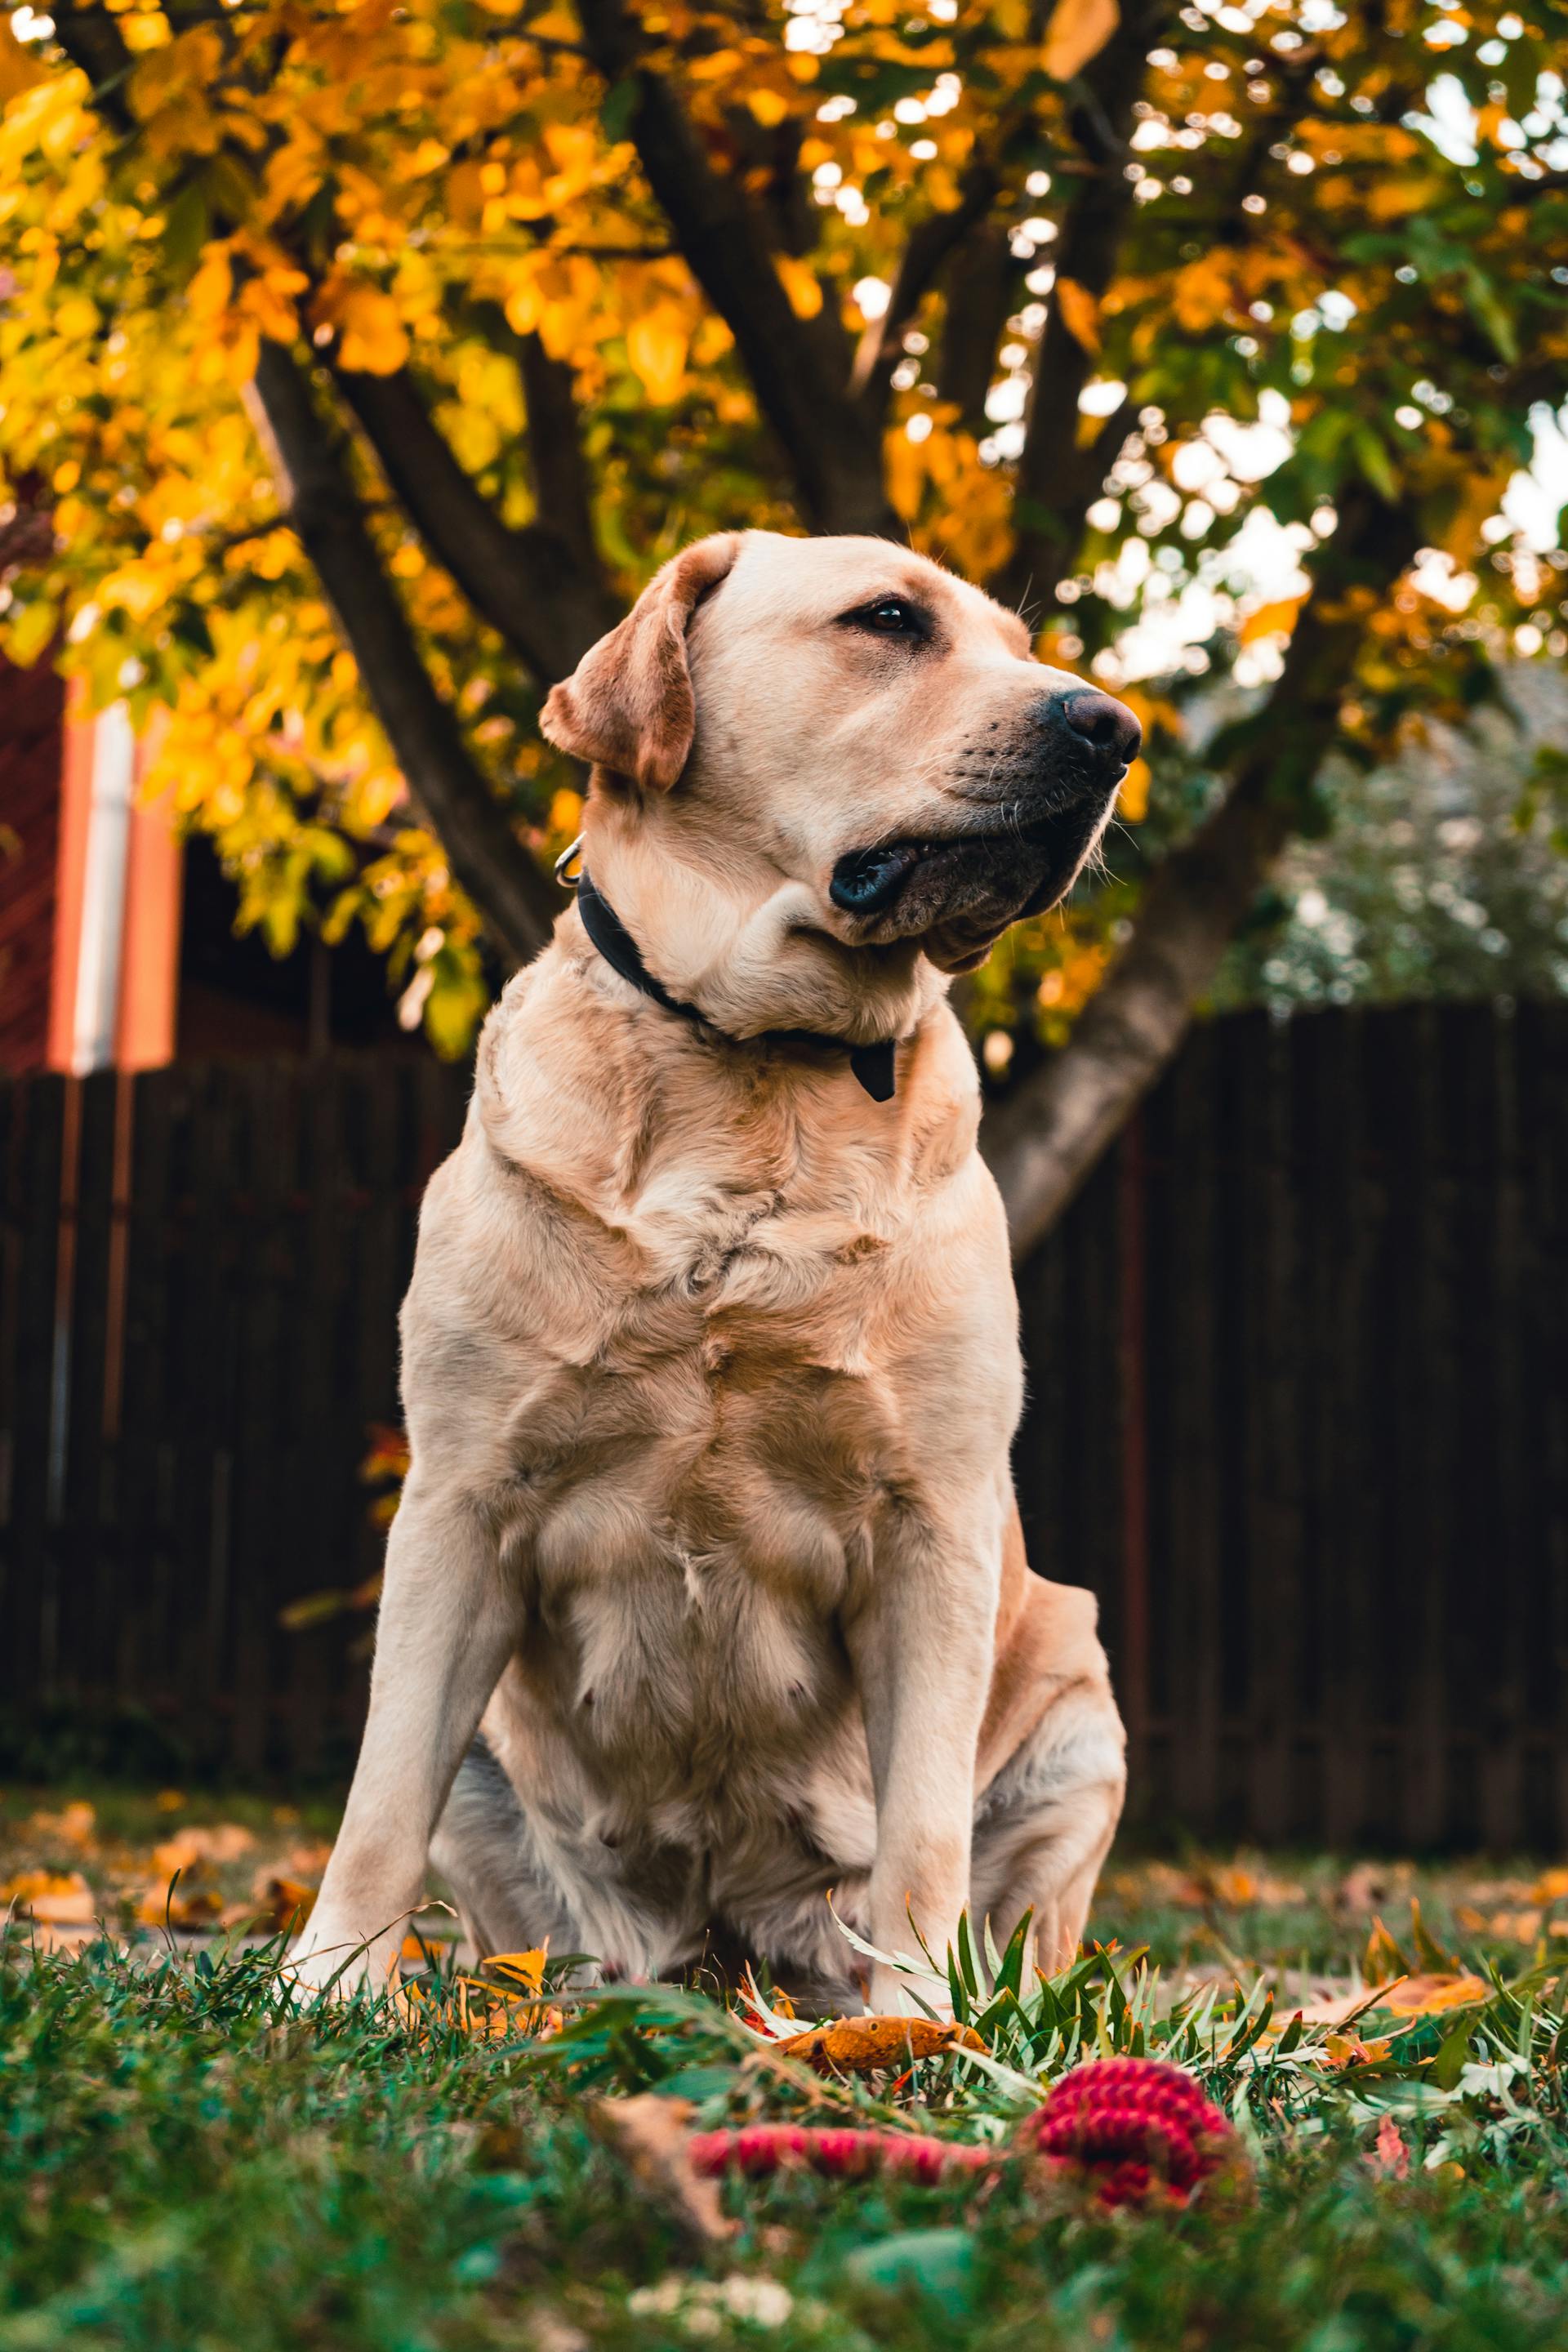 A dog sitting on grass | Source: Pexels